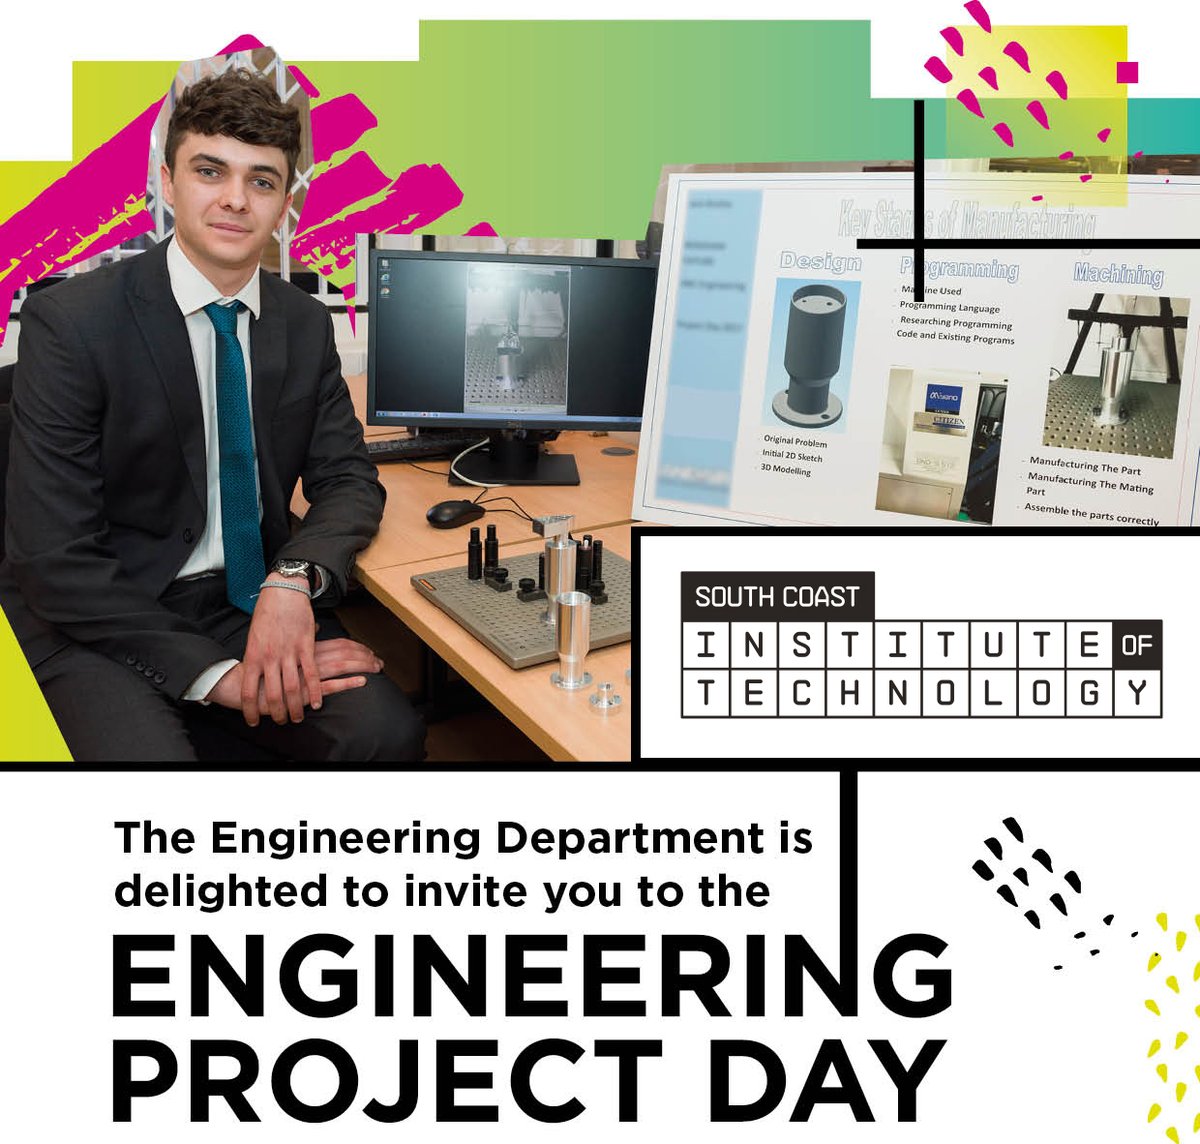 Our ENGINEERING PROJECT DAY 2024 is taking place on Thursday 23 May.

If you are an engineering-related employer... this could be the perfect event for you! 

BOOK YOUR FREE PLACE NOW email realbusiness@hsdc.ac.uk

#HSDC #Engineering